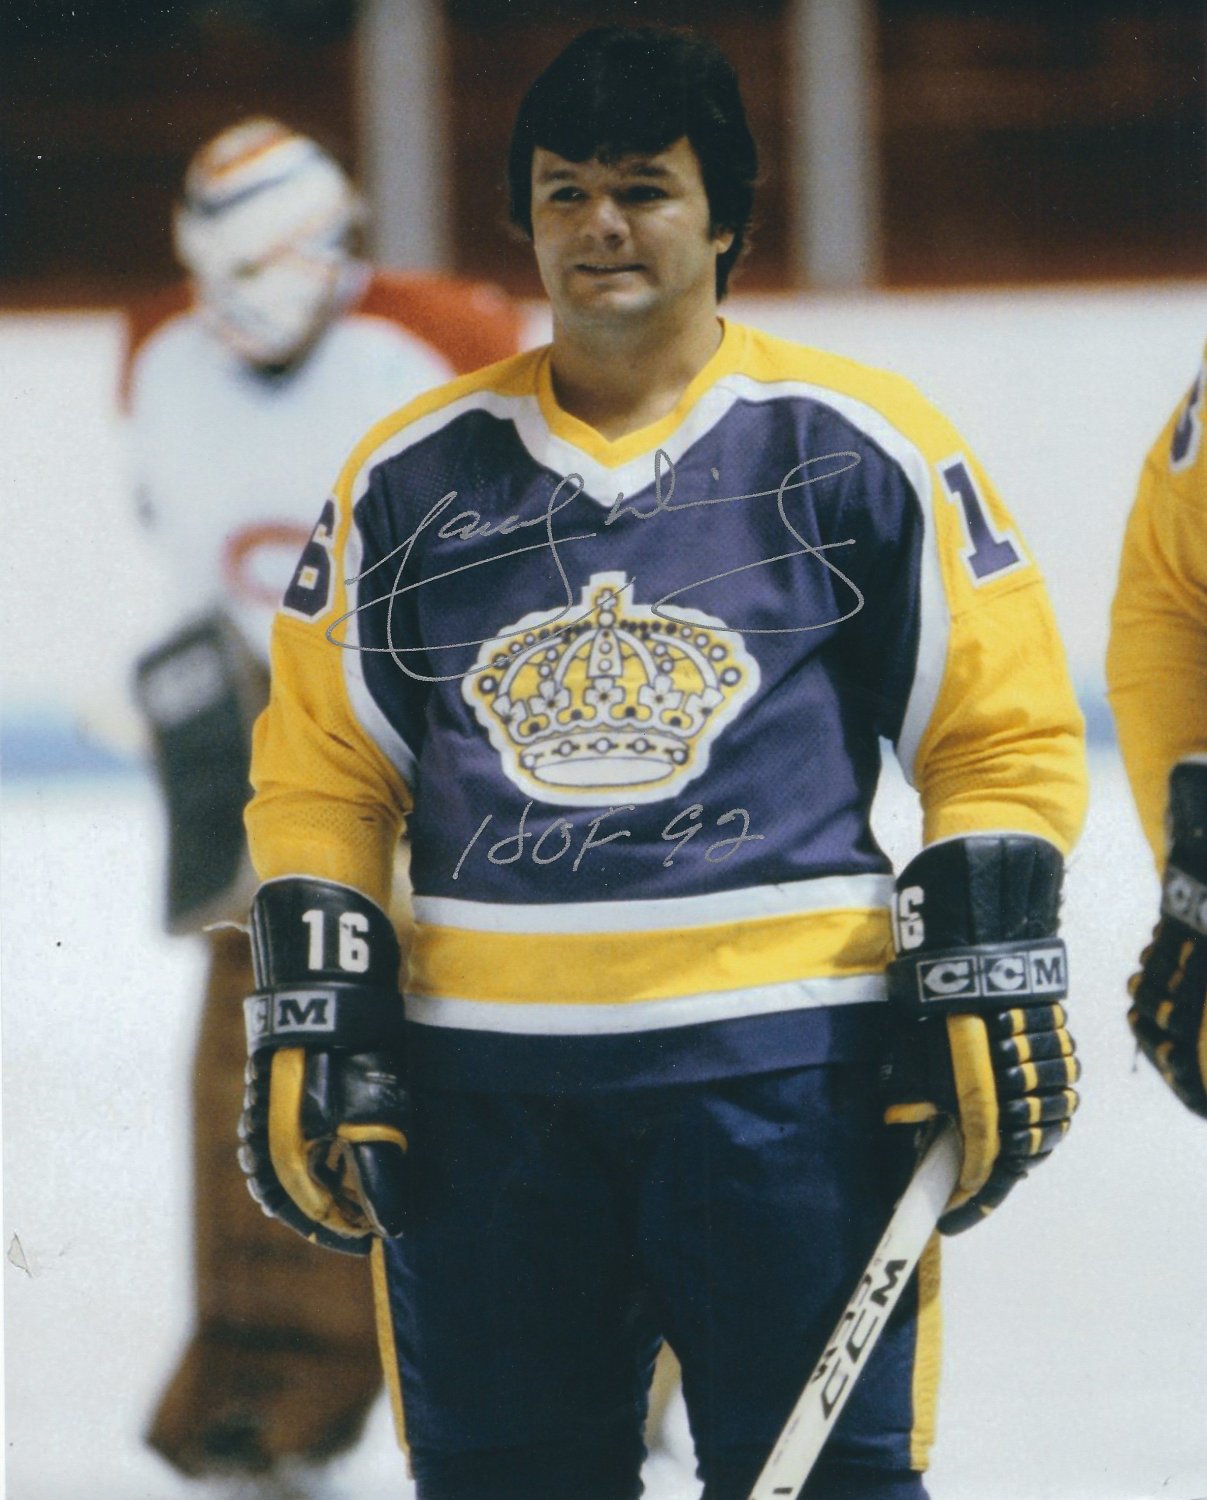 MARCEL DIONNE Signed Los Angeles Kings Hockey Photo 8 X 10 signed